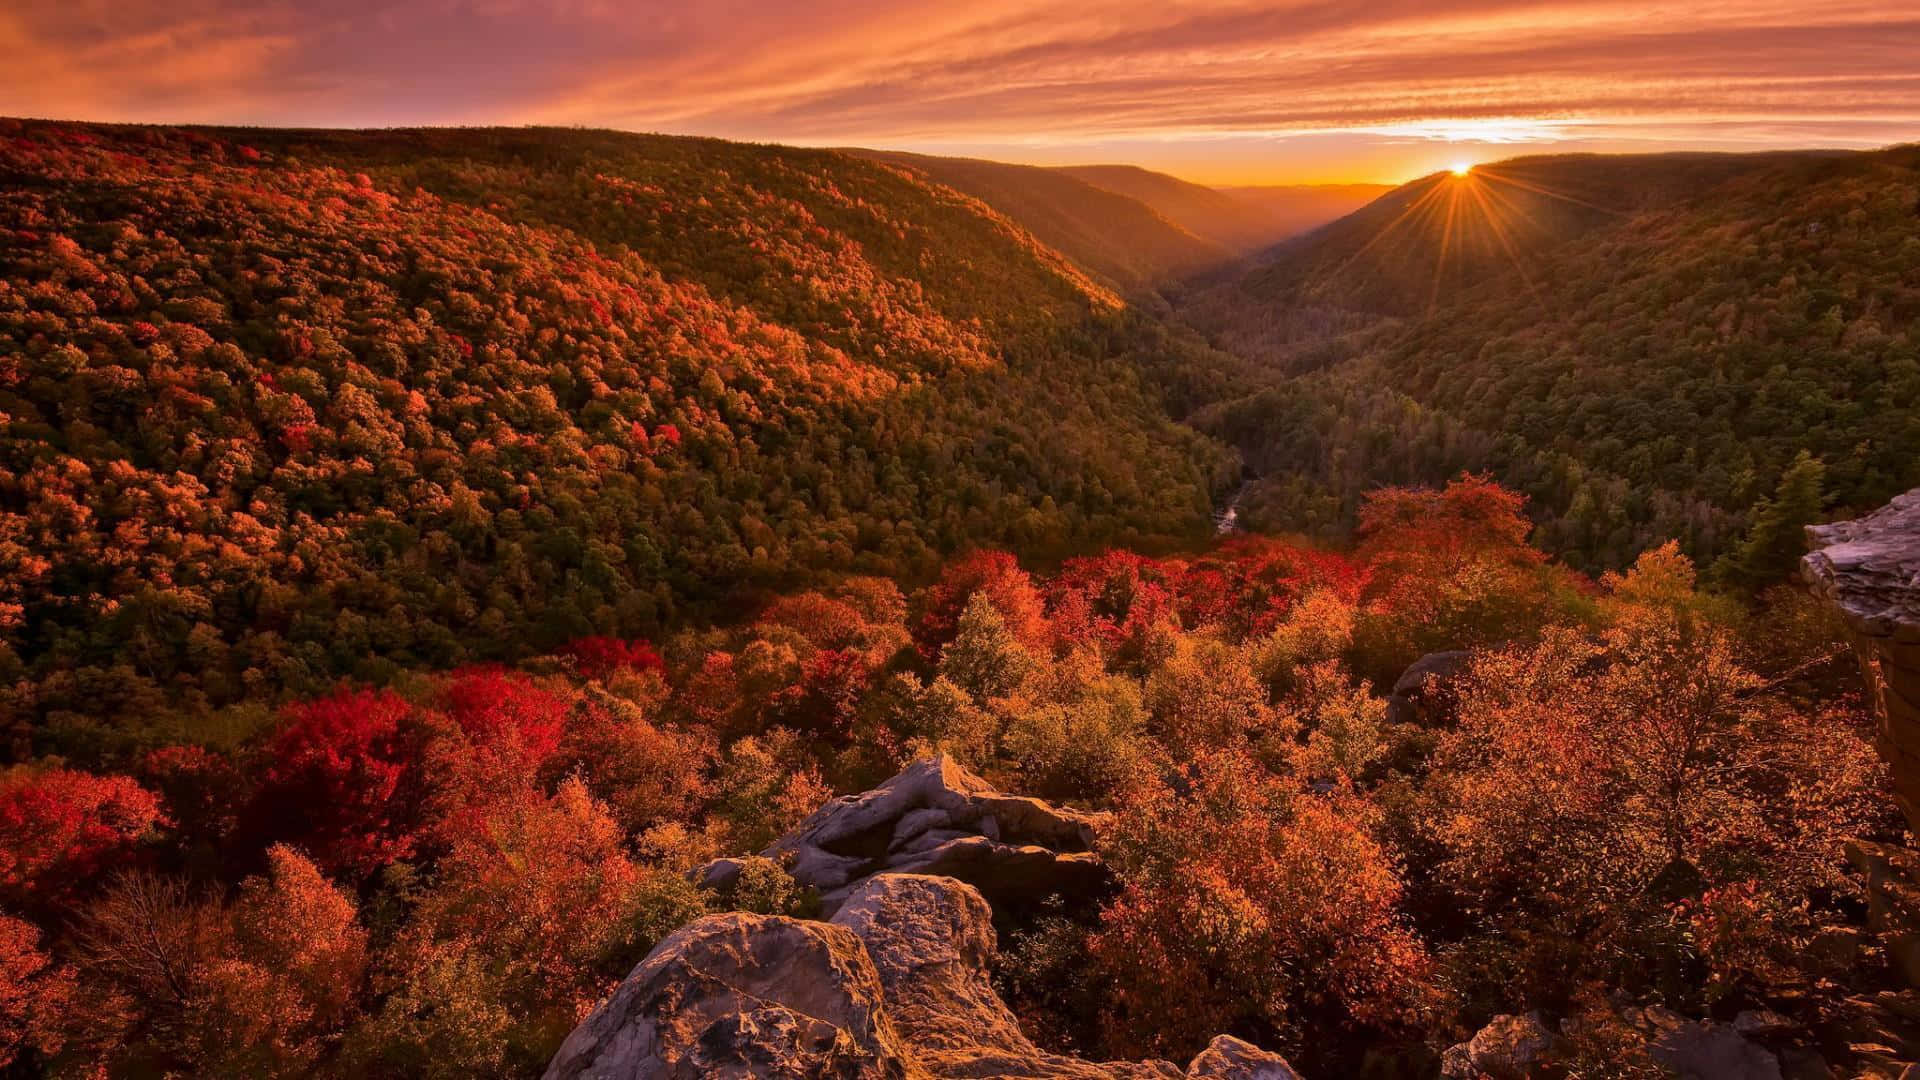 A Sunset Over A Valley With Colorful Trees